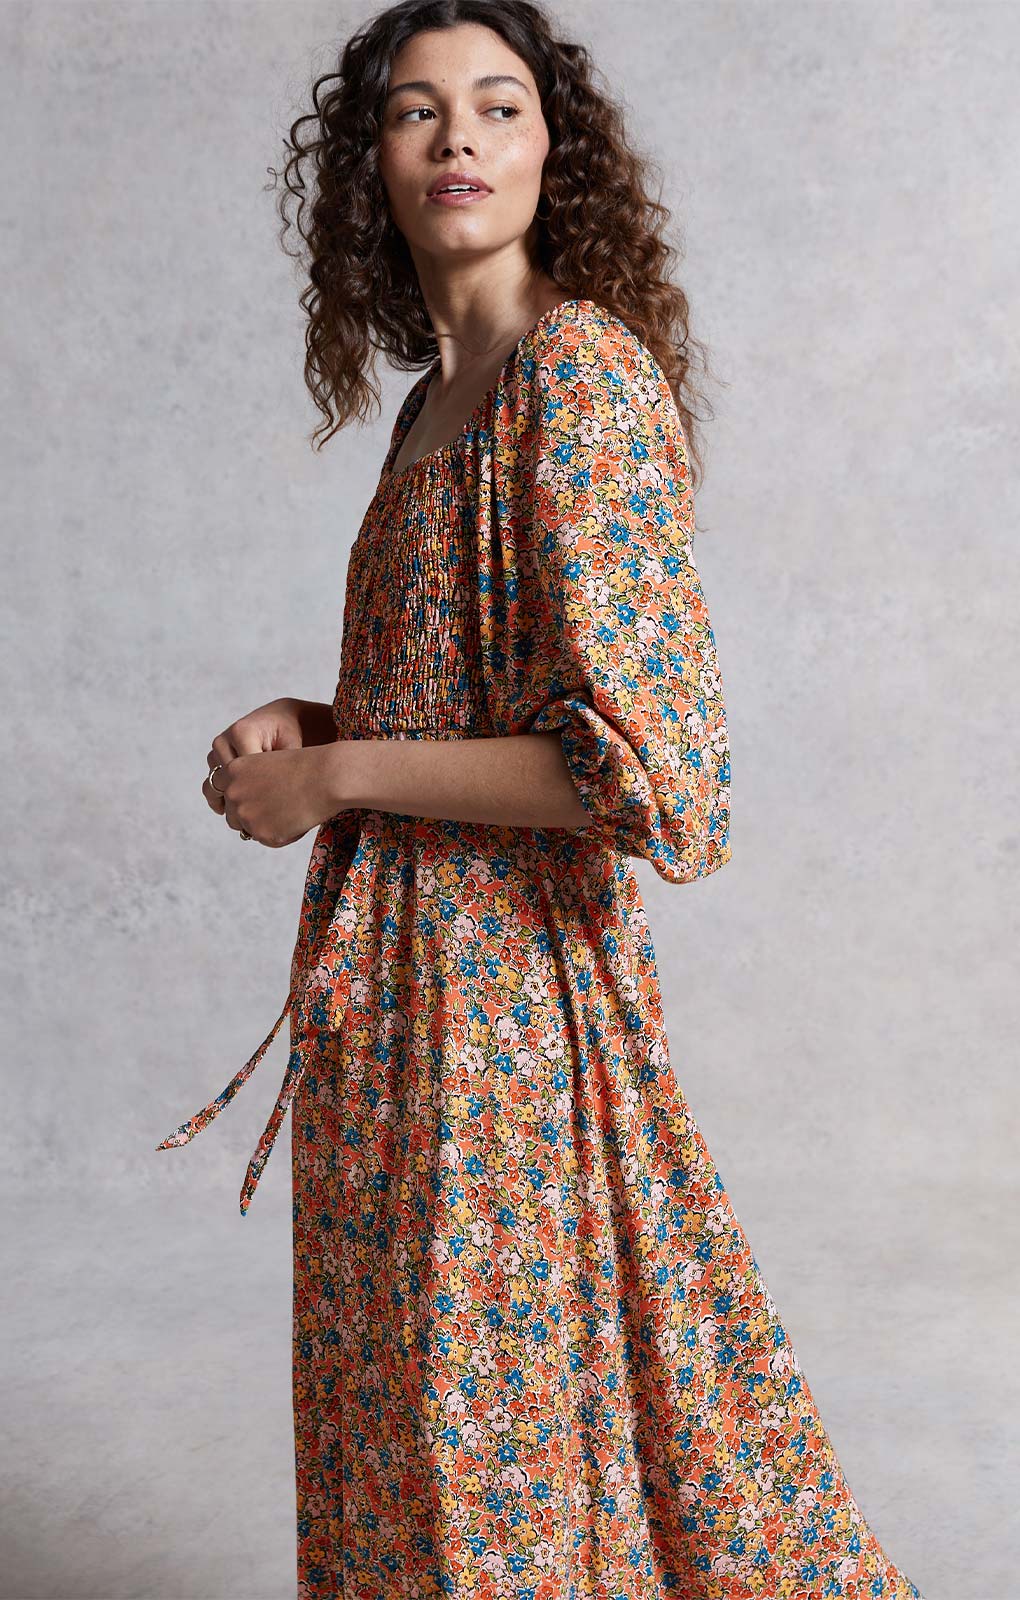 M&S X Ghost Ditsy Smock Dress product image